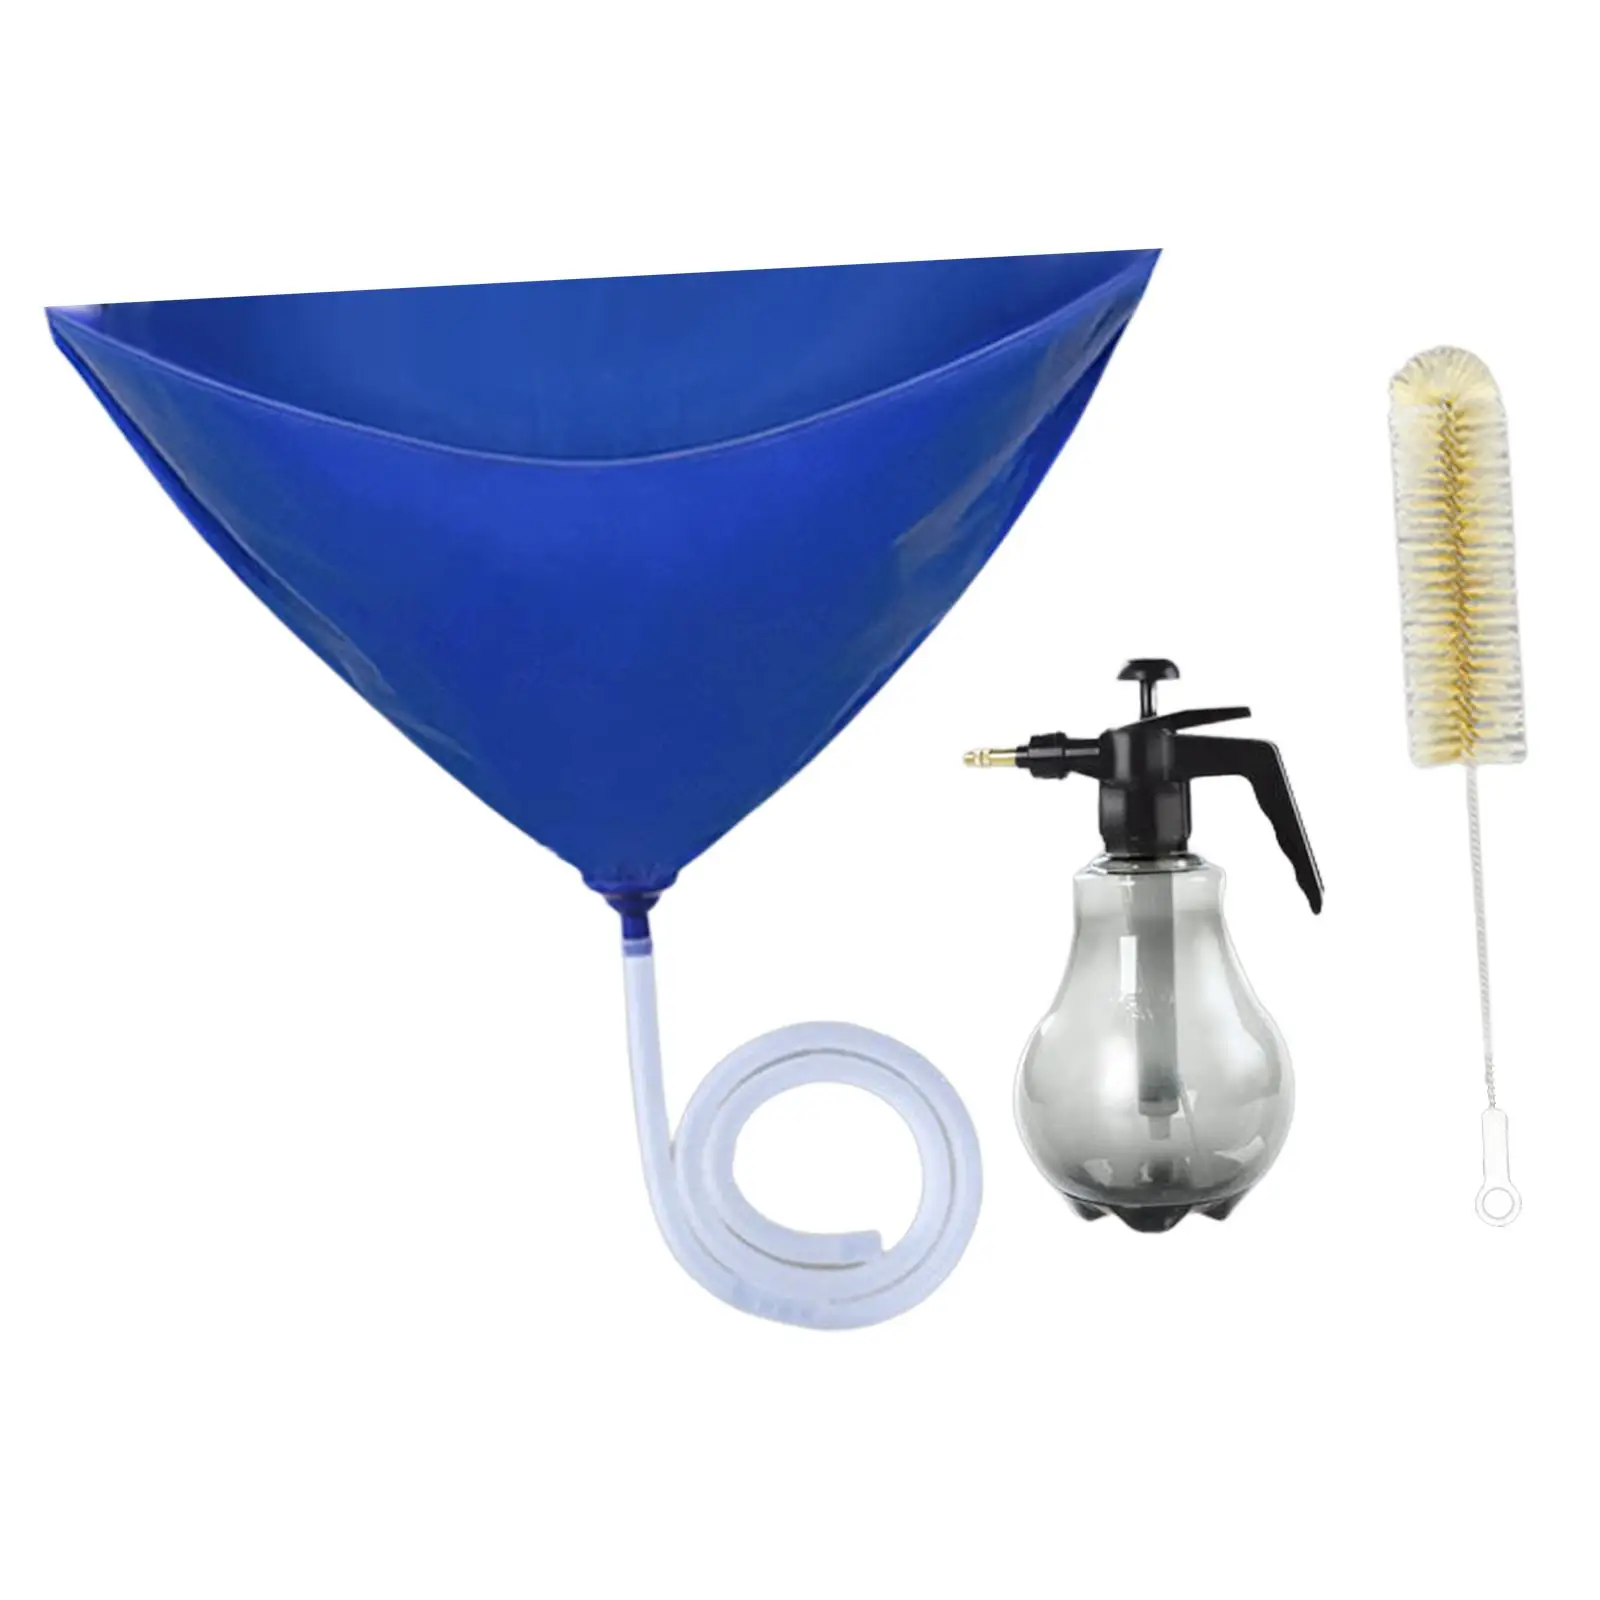 Air Conditioning Cleaning Bag Dust Washing with Brush and Drainage Hose Reusable below 2P Air Conditioner Cleaning Cover